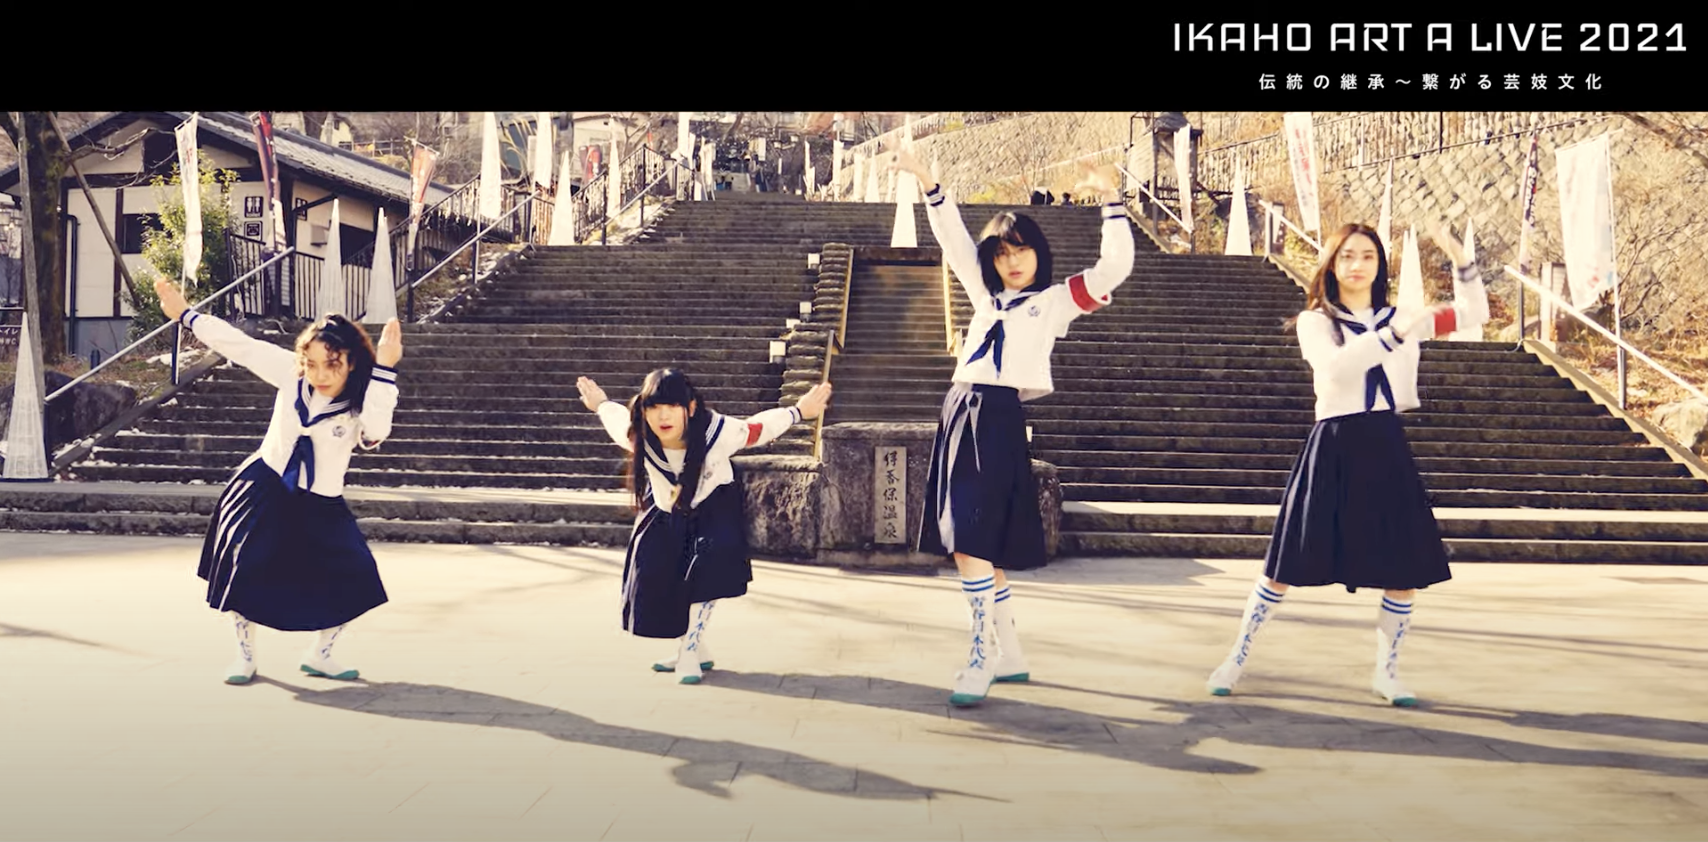 【4K】“IKAHO ART A LIVE 2021 -Passing on Tradition- Connecting Geigi Culture” Trailers／群馬県・伊香保温泉